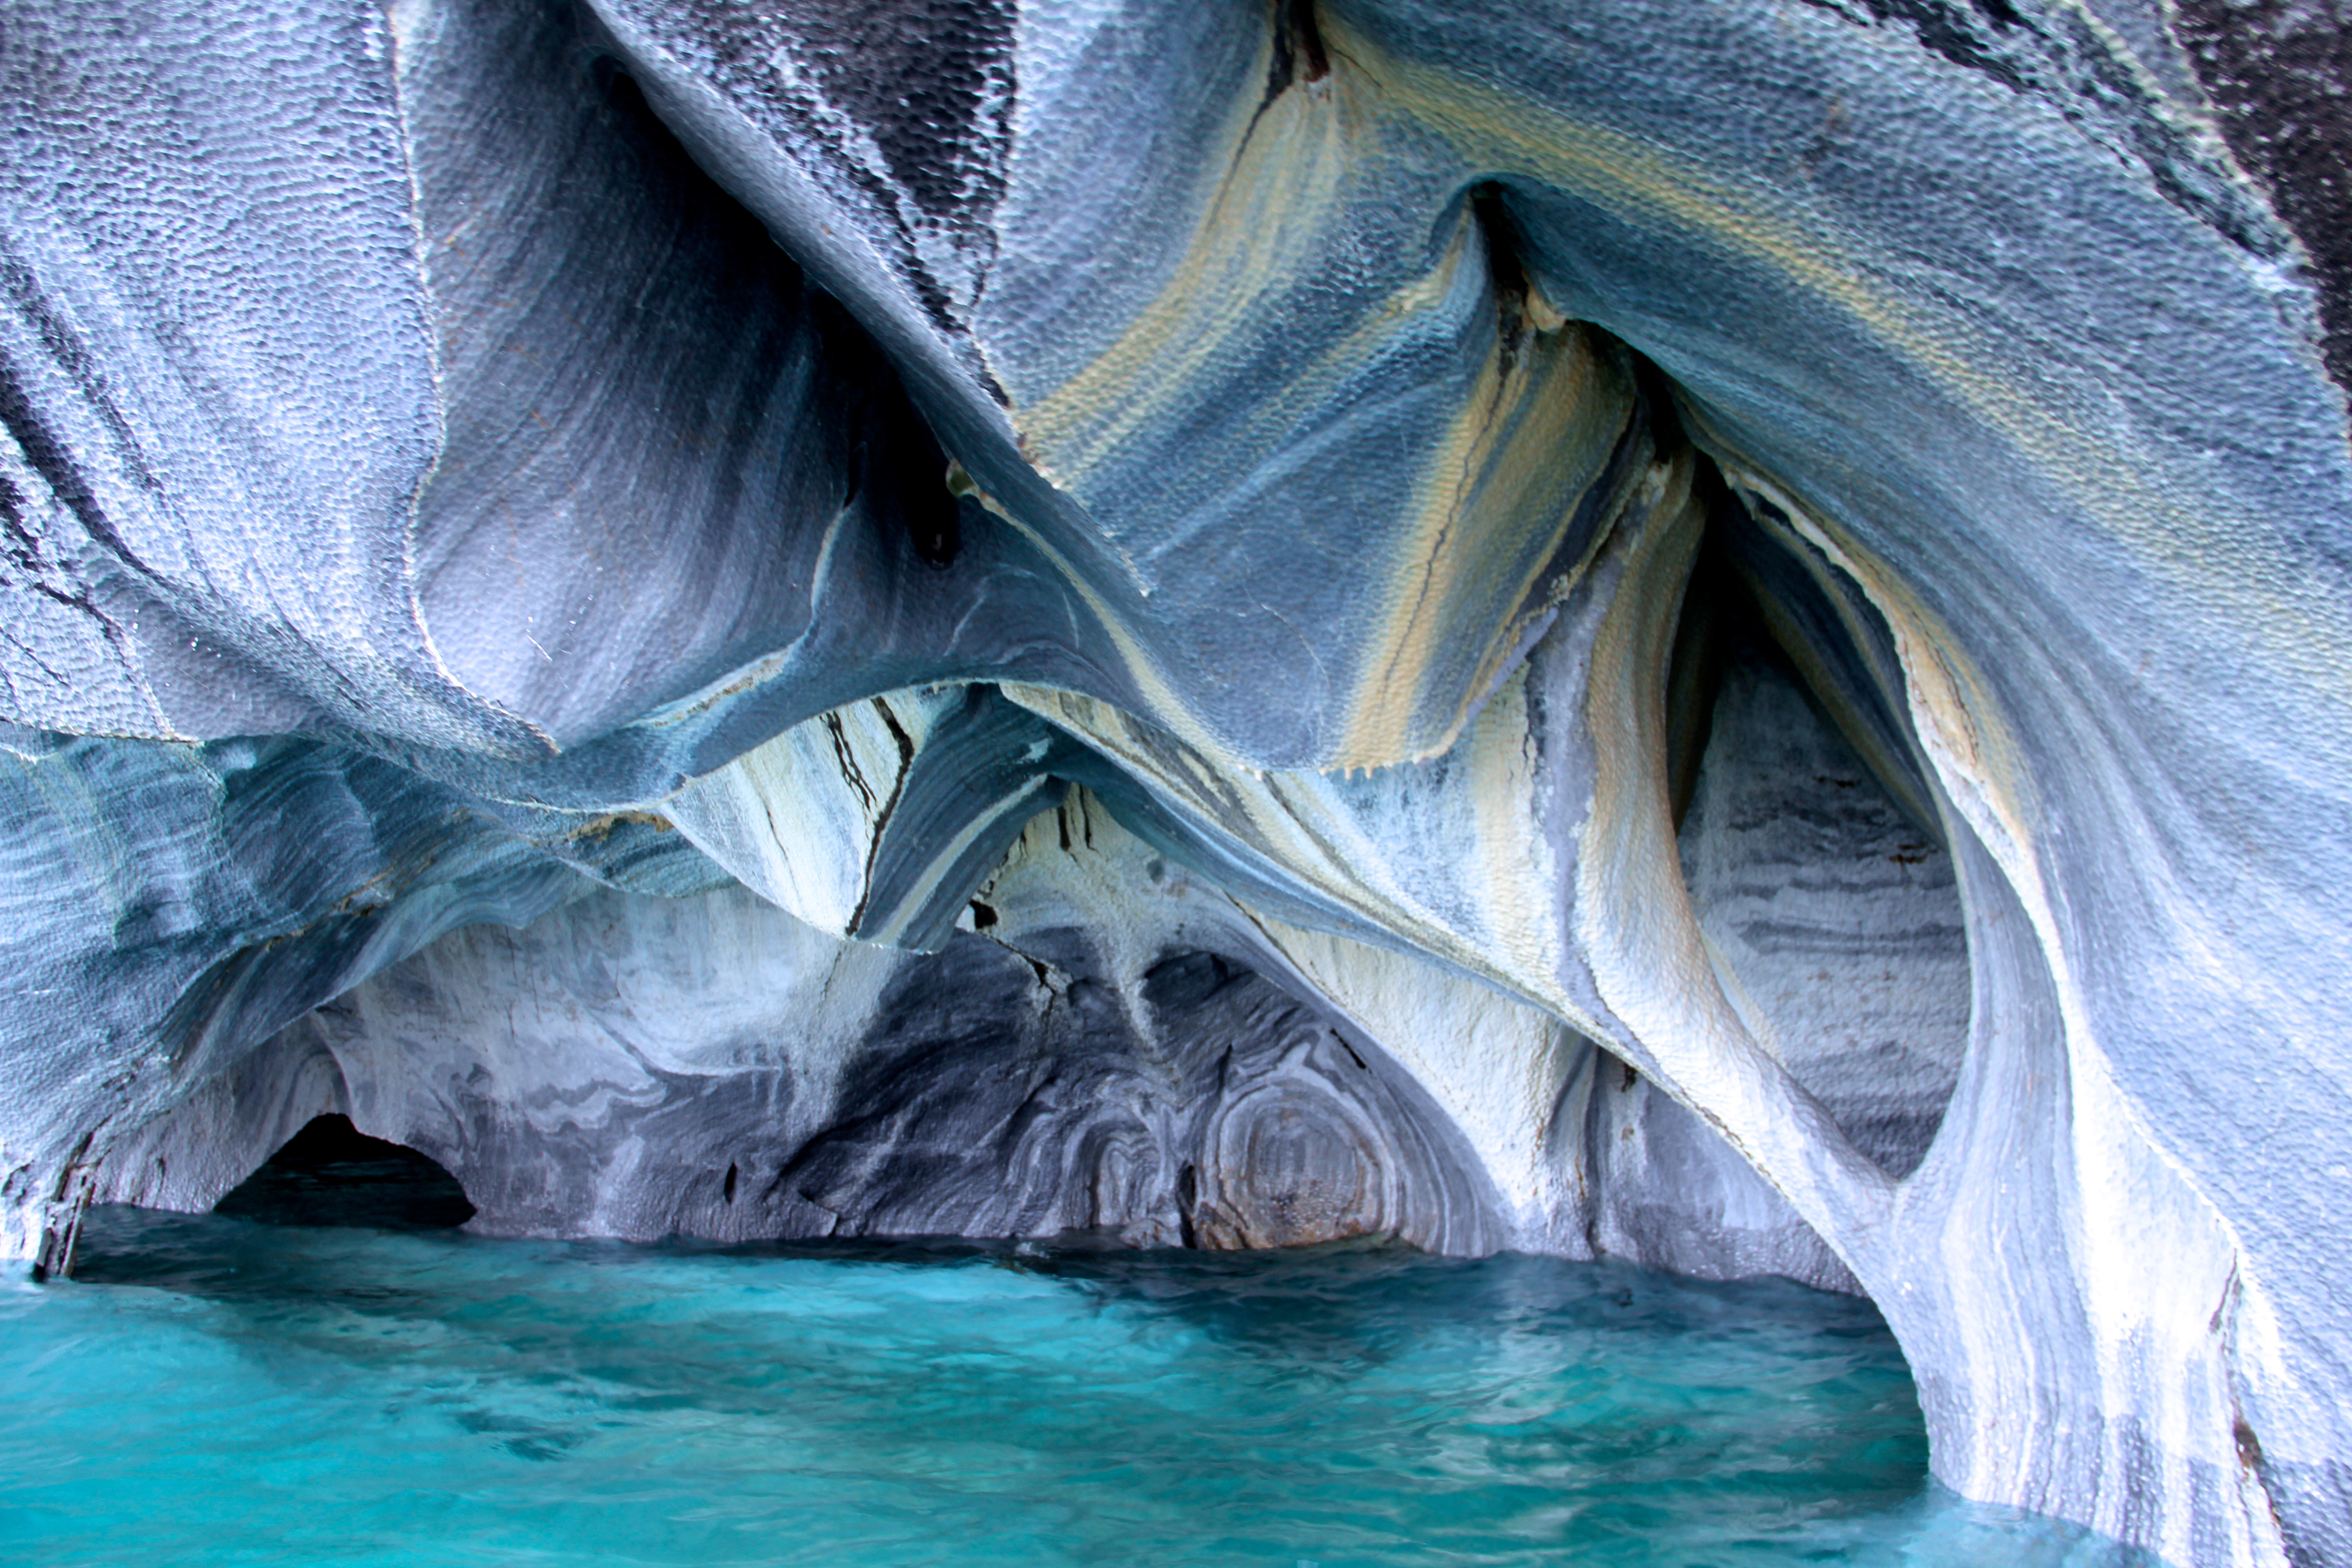 Marble Beautiful Caves In The World Travel Wallpaper Images Free